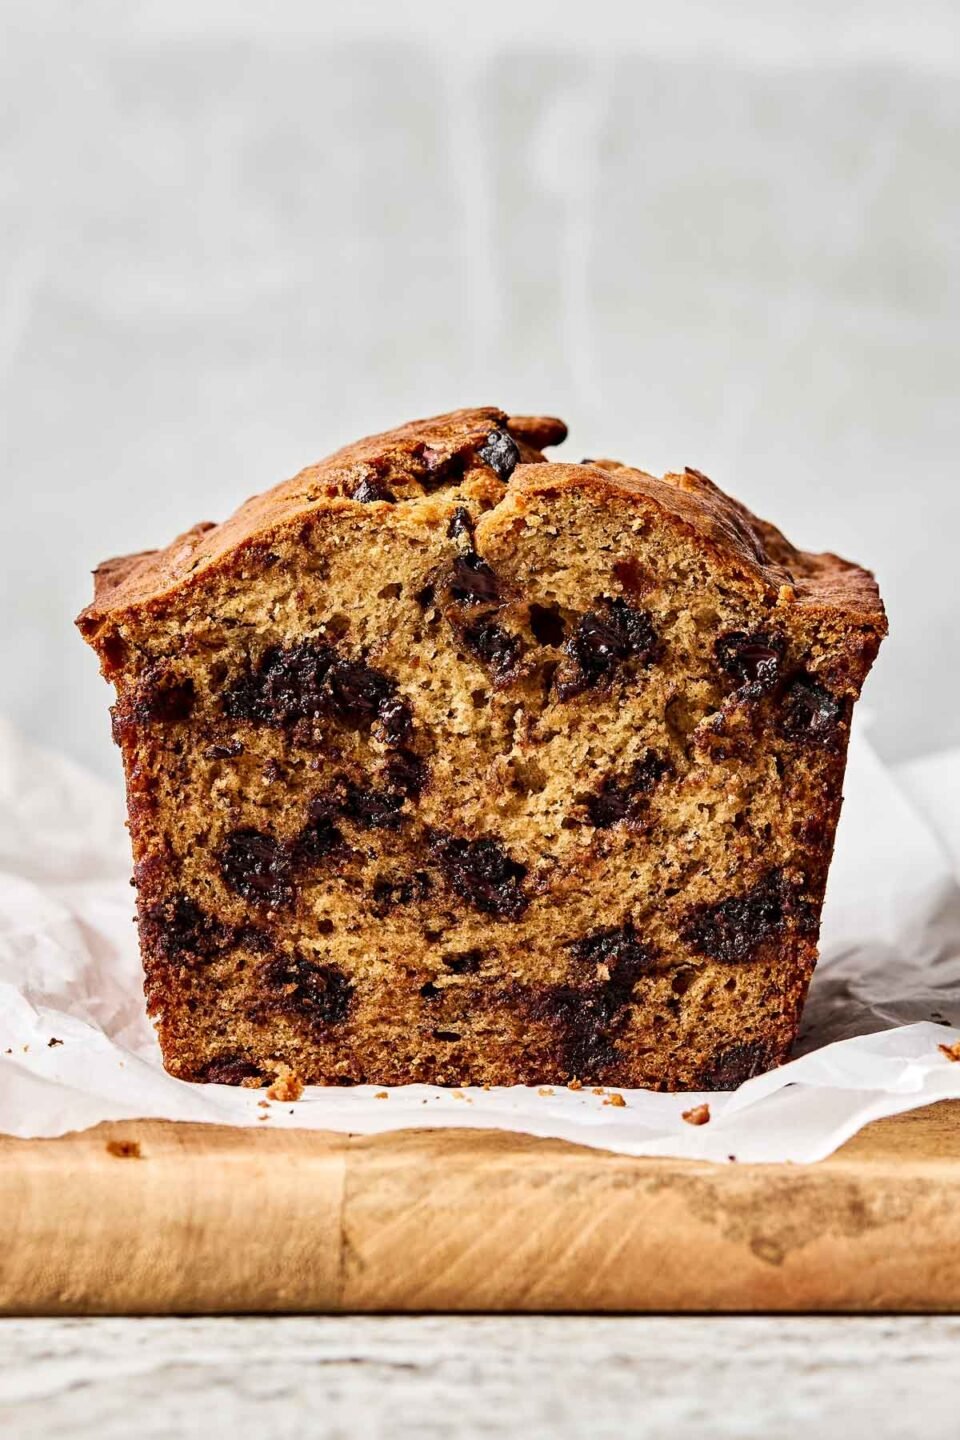 A close-up side shot of a halved loaf of banana bread, showing gooey chocolate chips. The bread sits on a parchment-lined wooden board atop a grey textured surface.